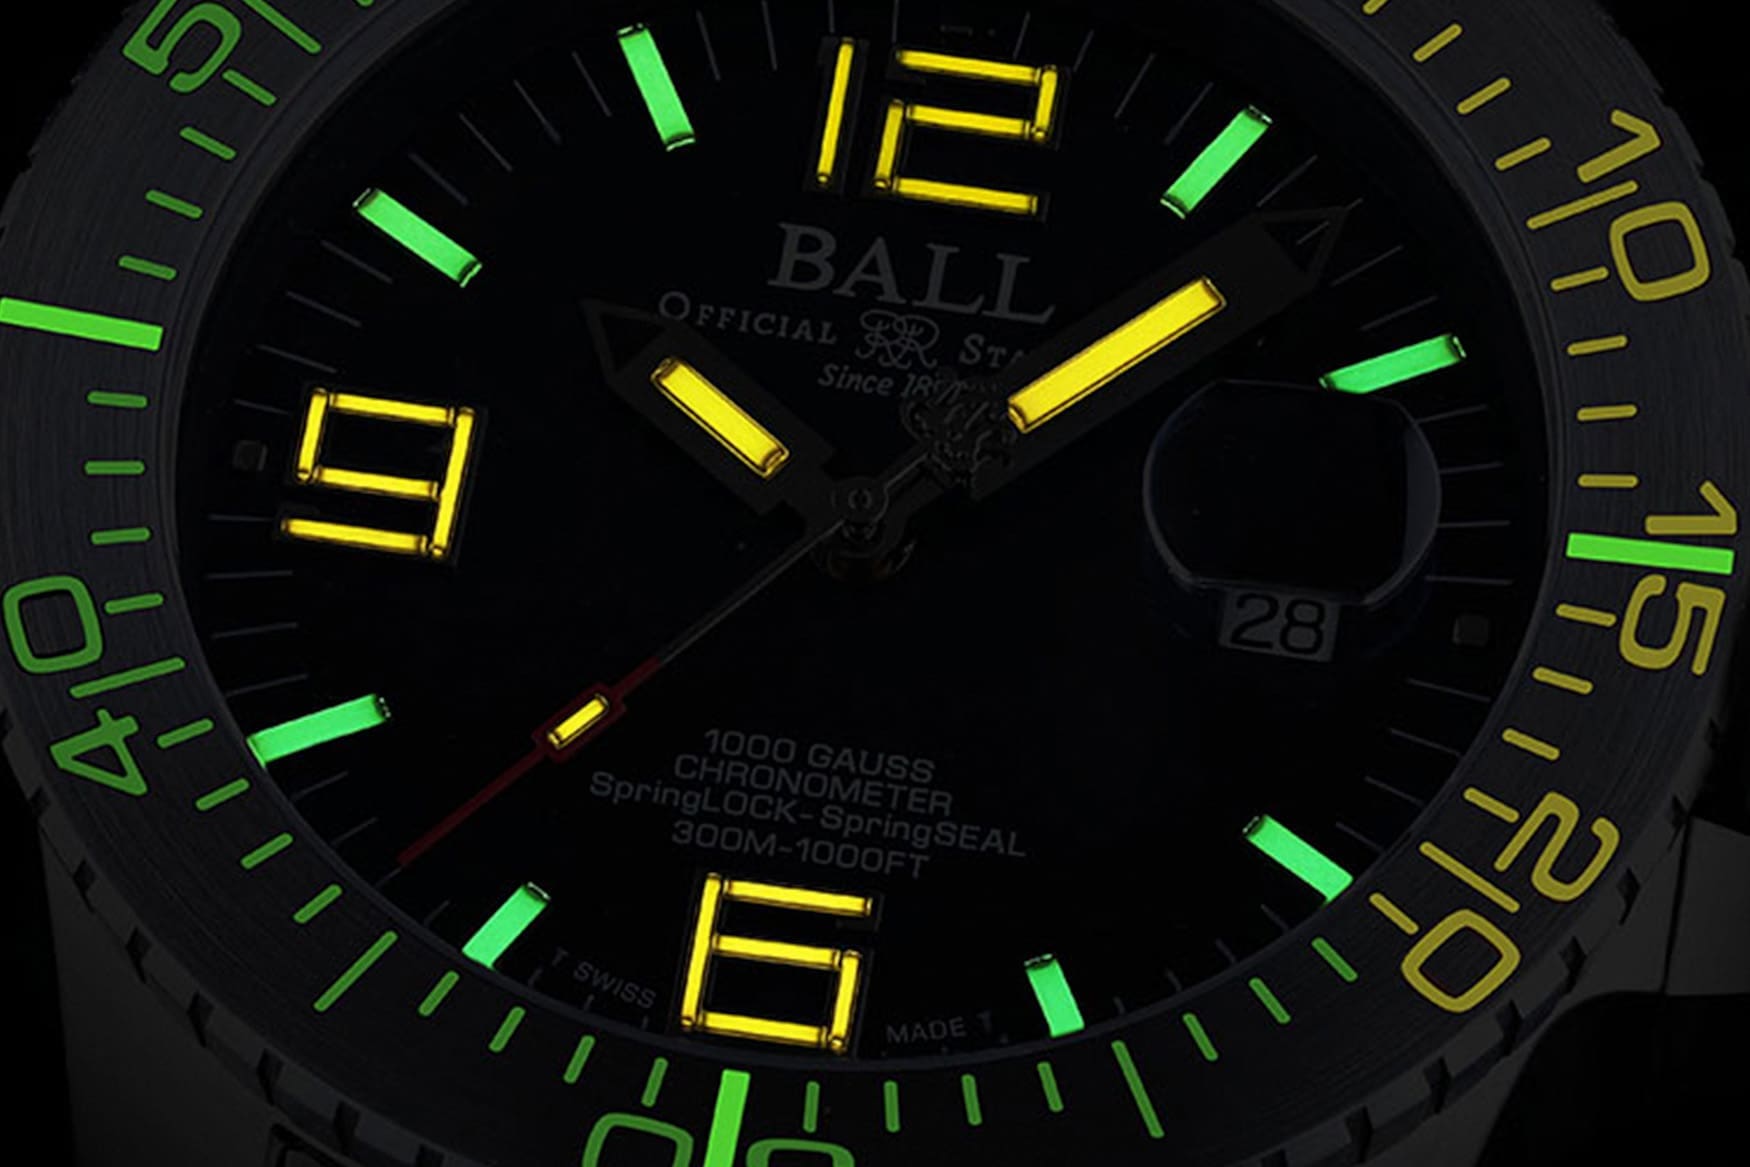 Ball engineer hydrocarbon eod dial lume